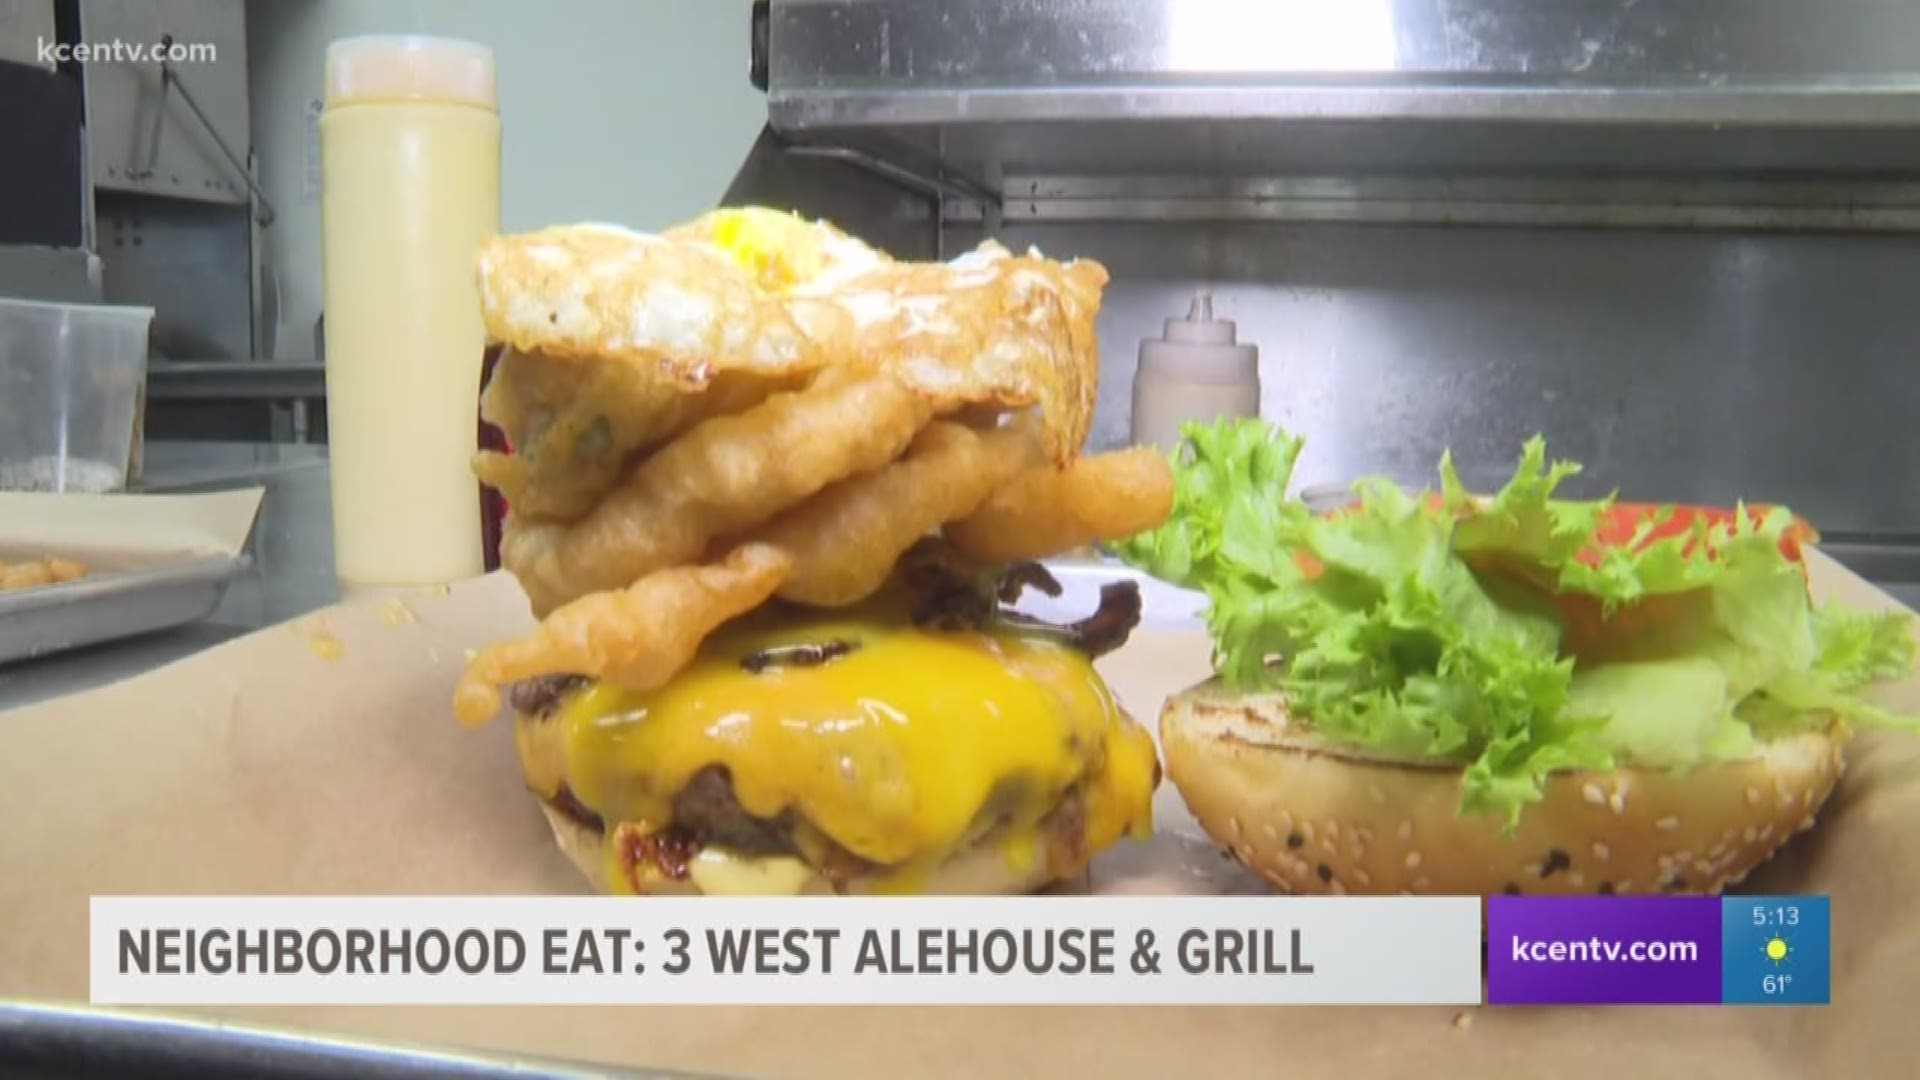 Finding a favorite local spot for an easy beer and meal can sometimes be a lengthy process. At 3 West Alehouse and Grill in Temple, they're taking the fuss out of the process and giving you a great neighborhood hangout.